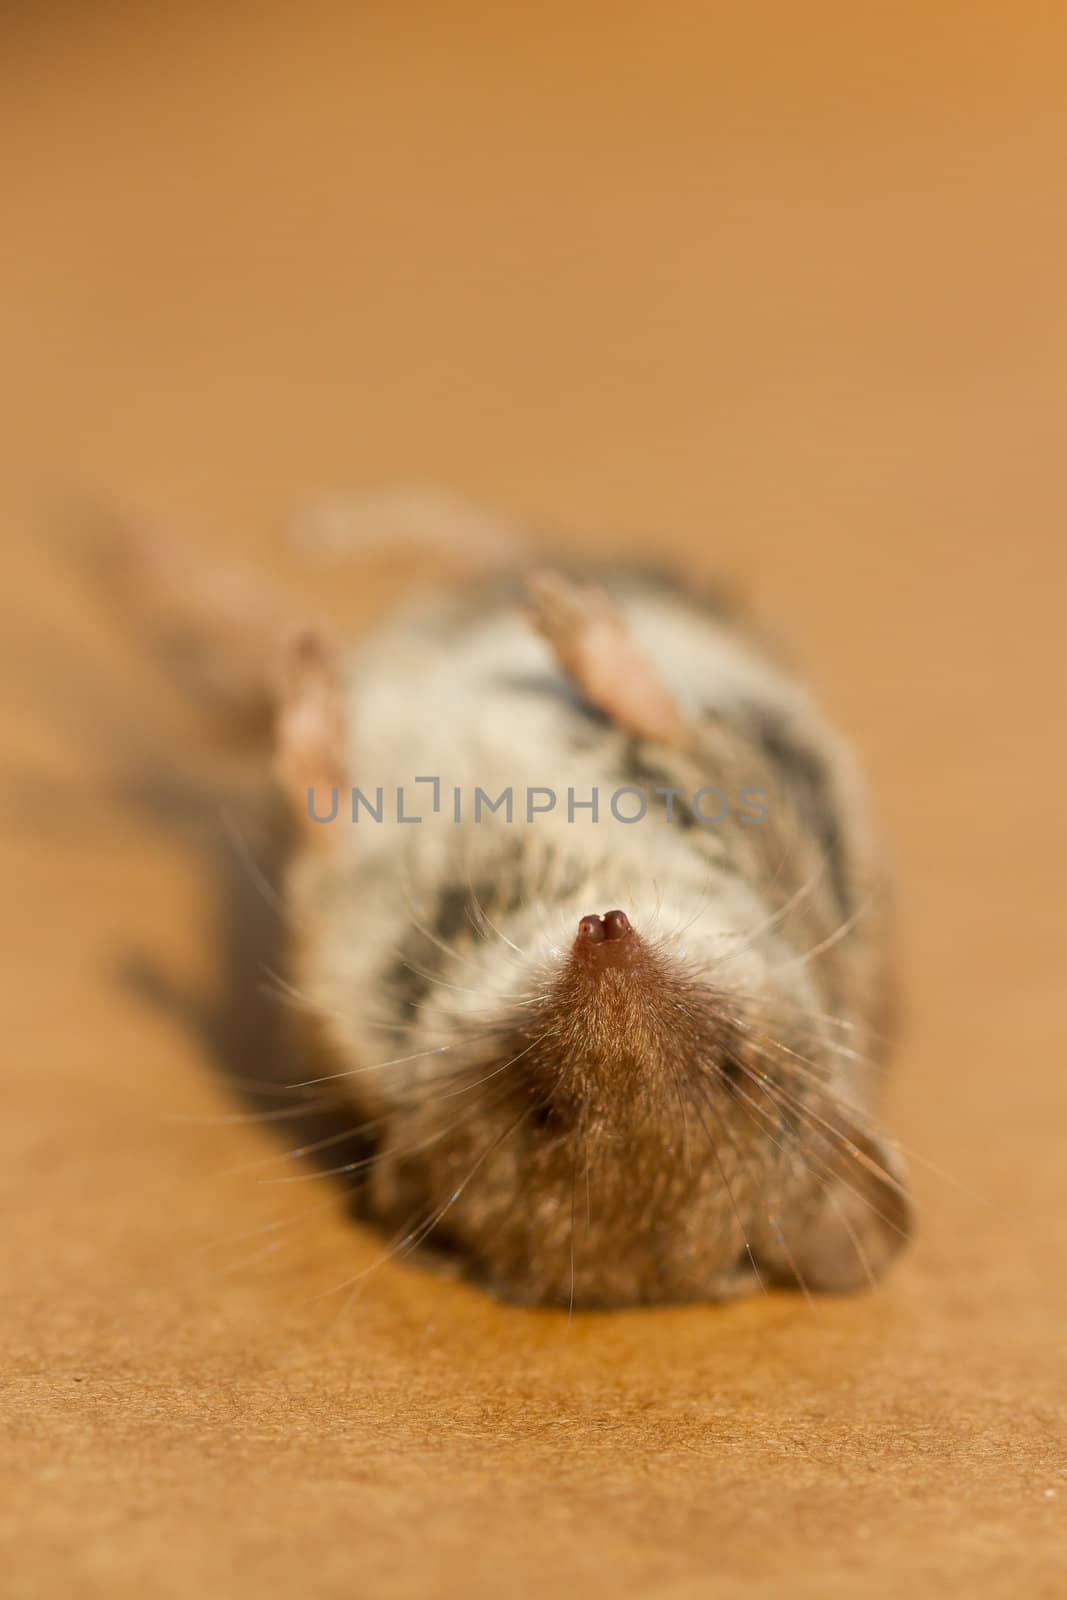 A mouse who fell victim to a cat